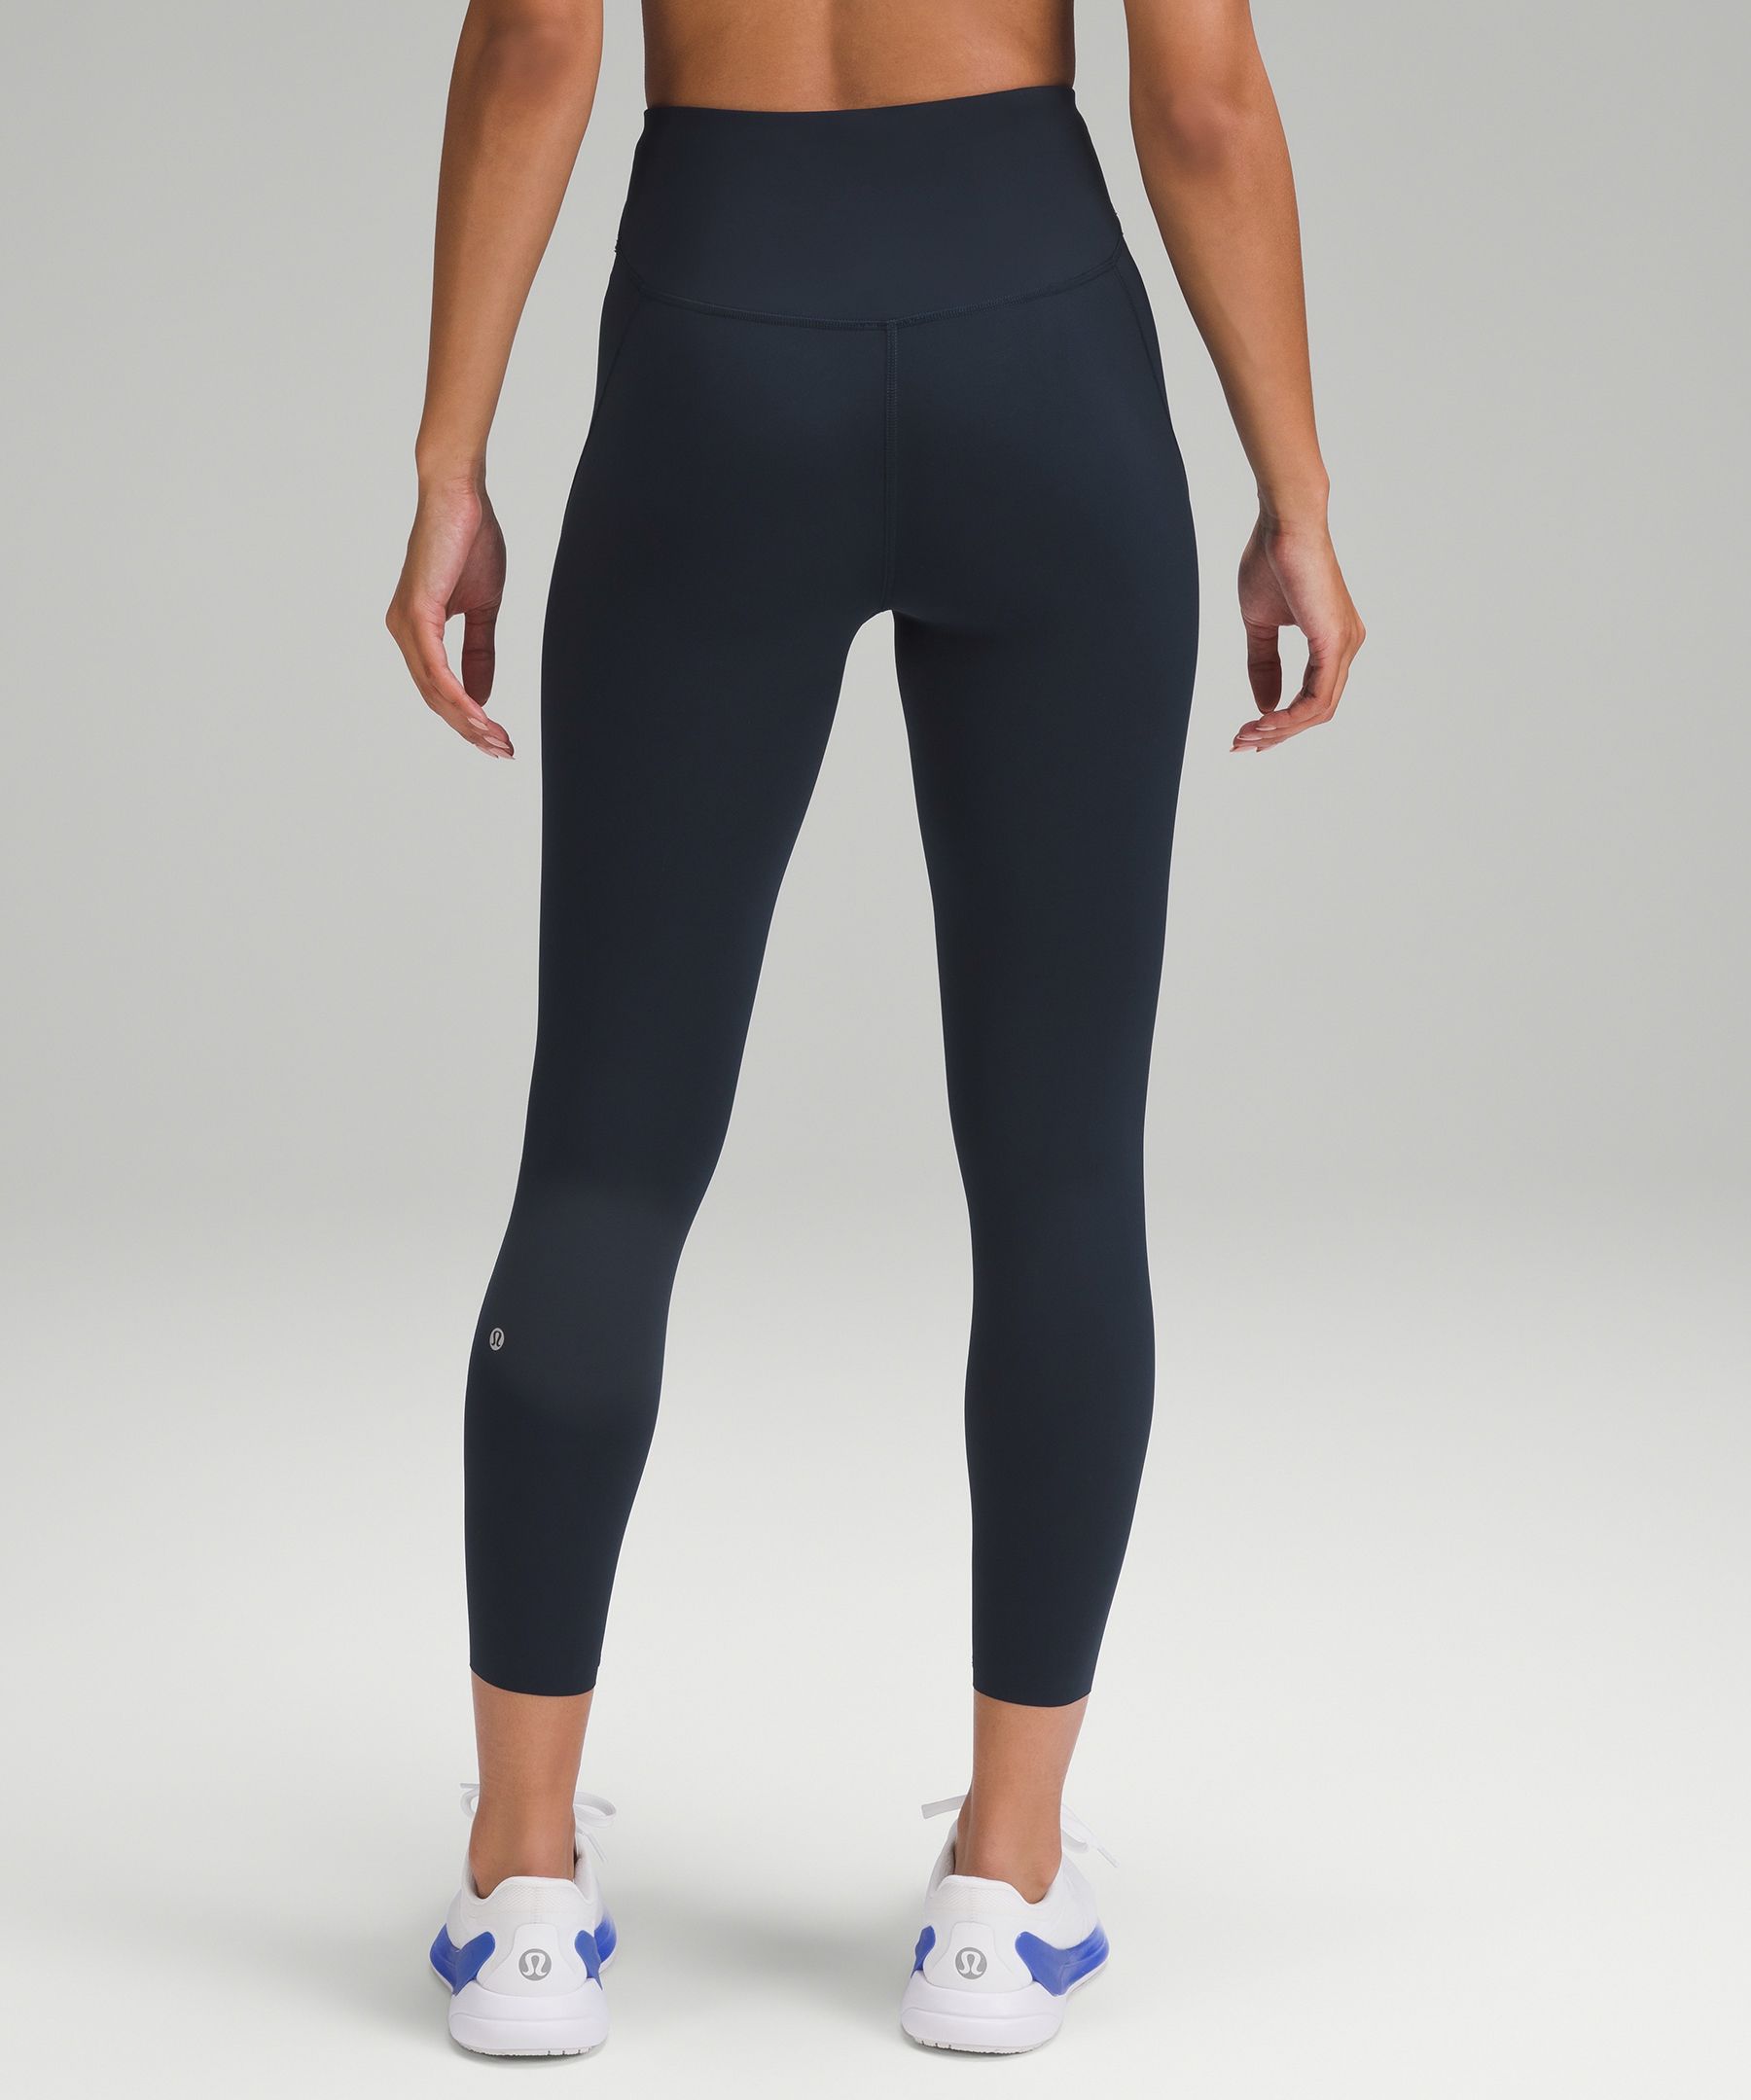 Lululemon Base Pace High-Rise Running Tight 25 *Brushed Nulux